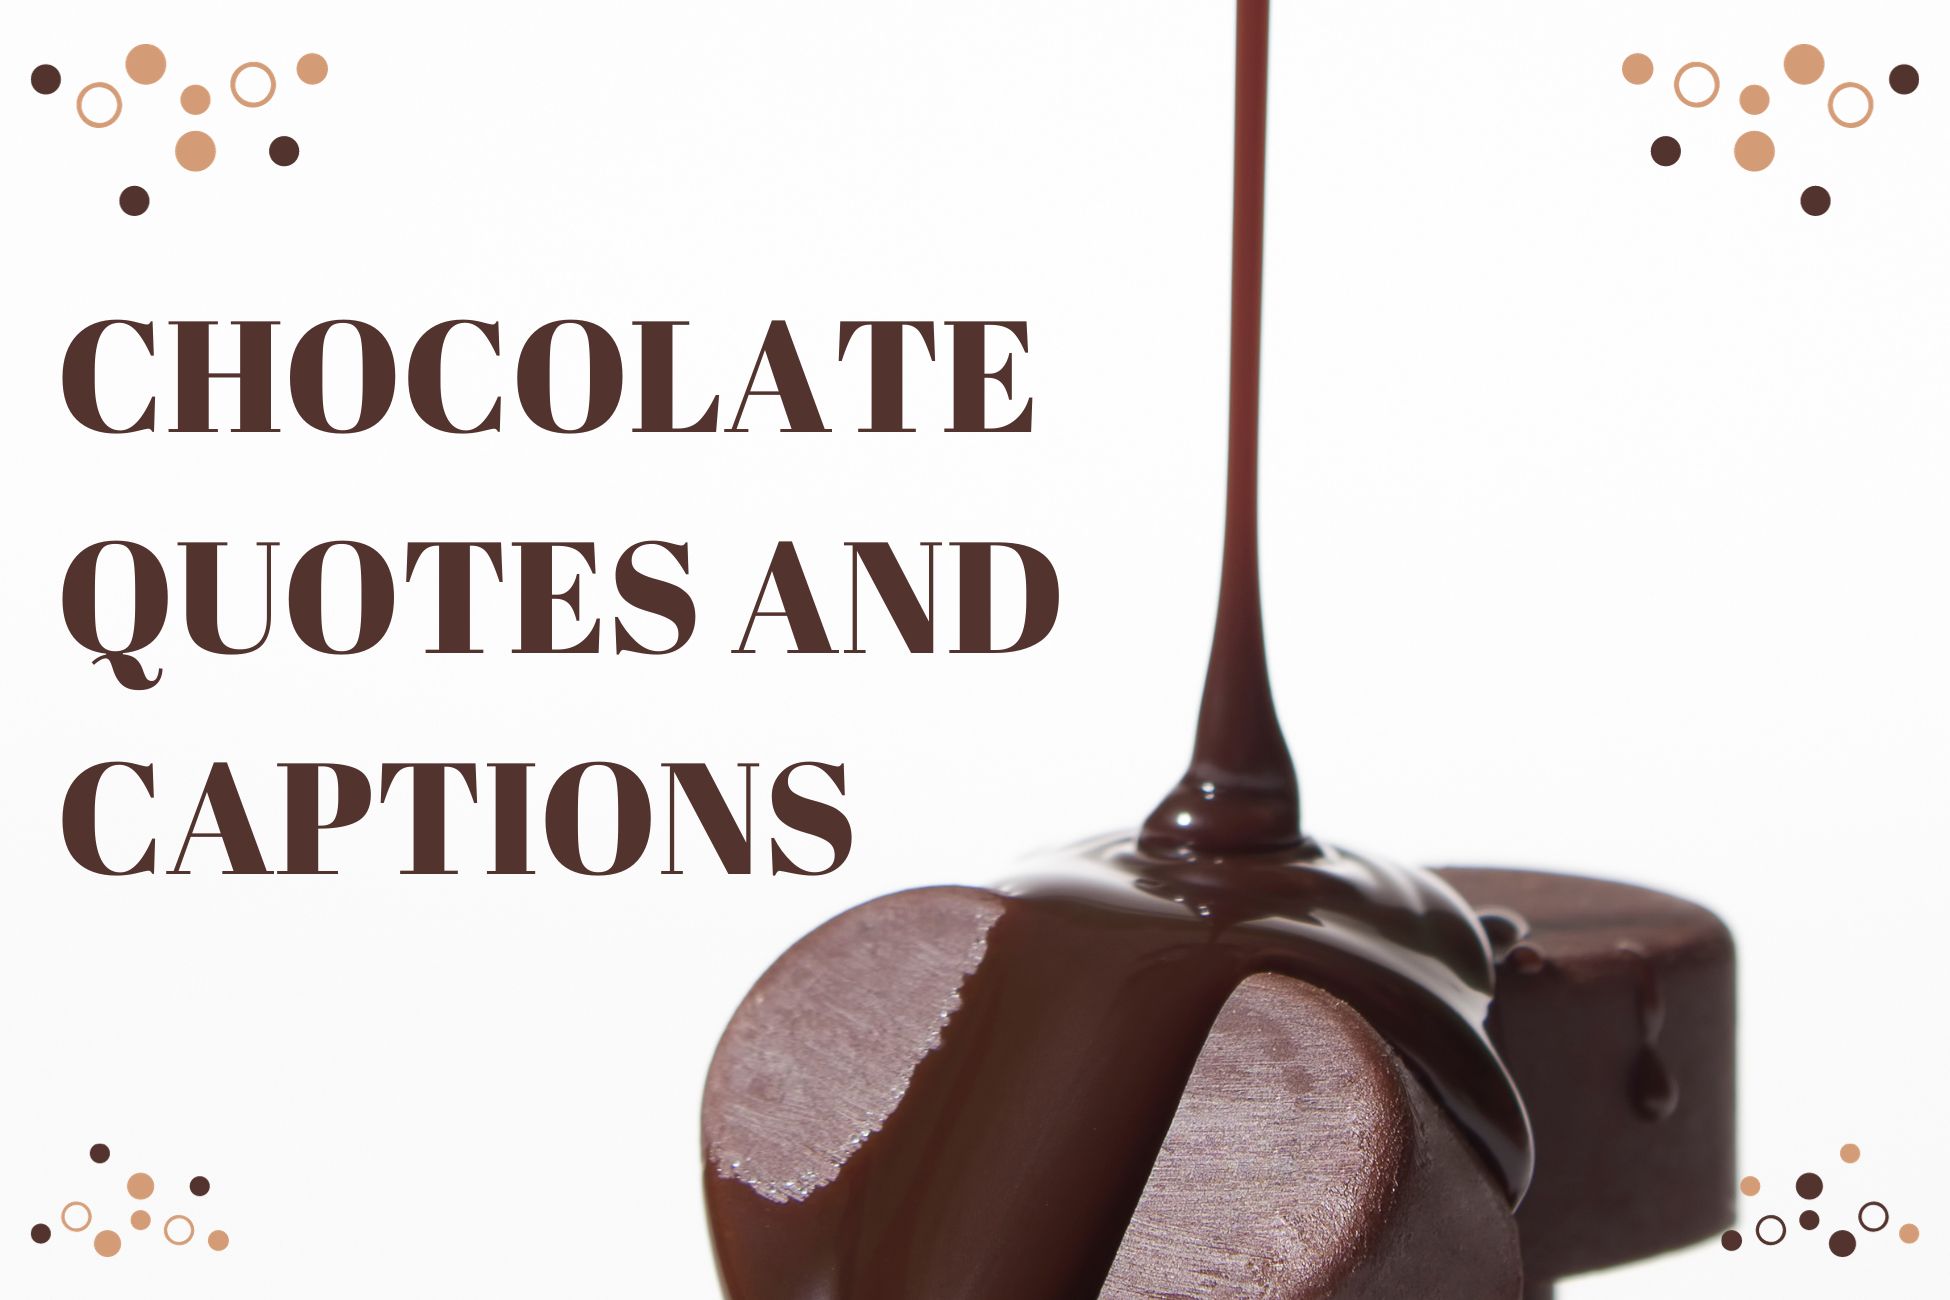 Chocolate Quotes And Captions